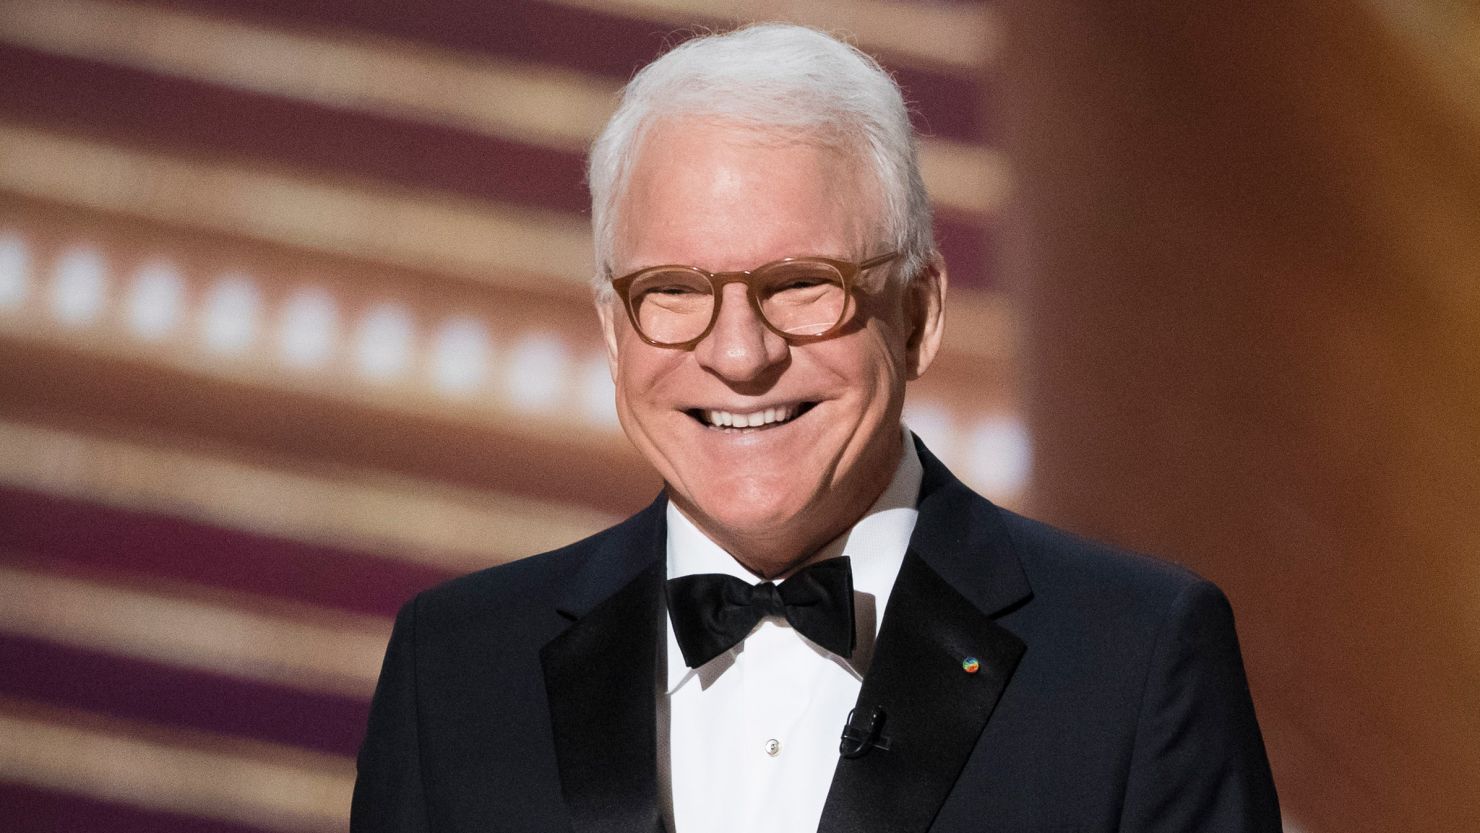 Actor Steve Martin speaks on stage during the Oscars in 2020 in Hollywood.